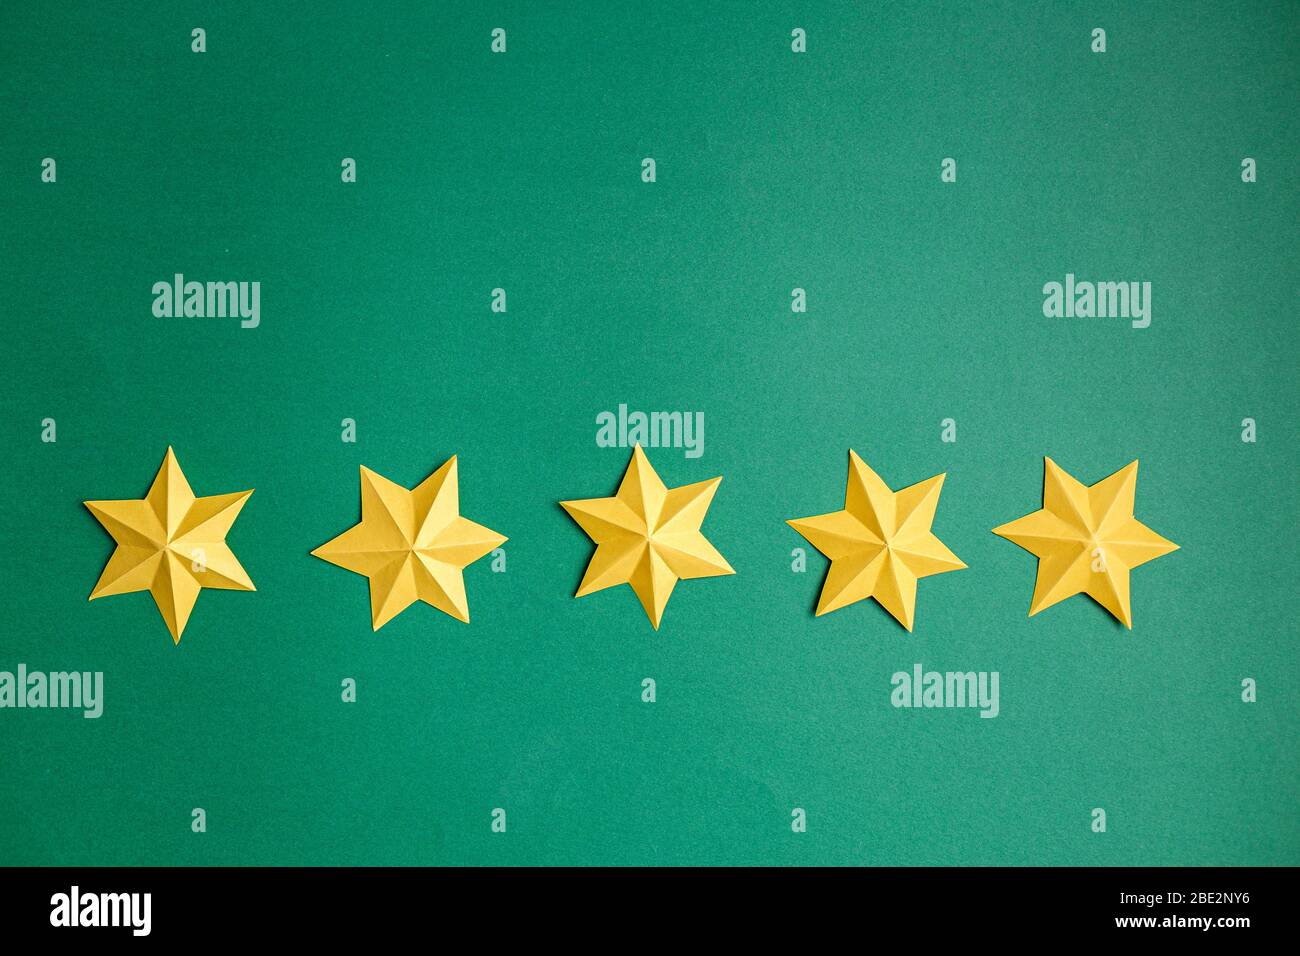 Yellow star paper over green background, five star rating concept. Feedback, Service rating, satisfaction concept, place for text. Stock Photo